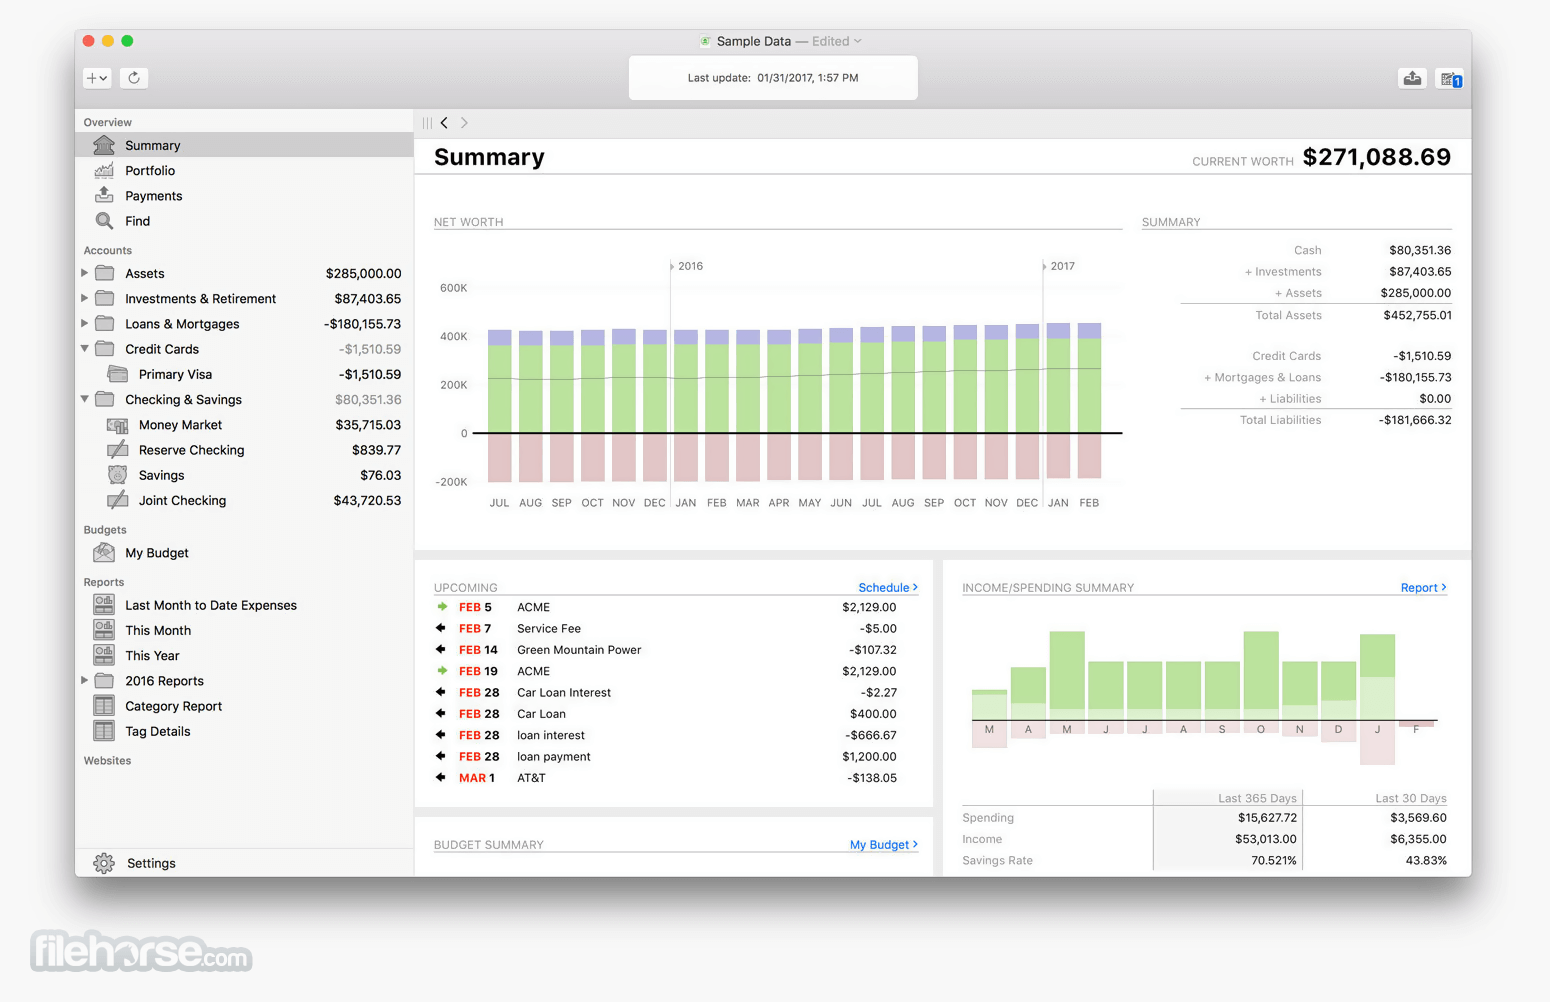 can i import all activity from banktivity to quicken 2017 for mac?